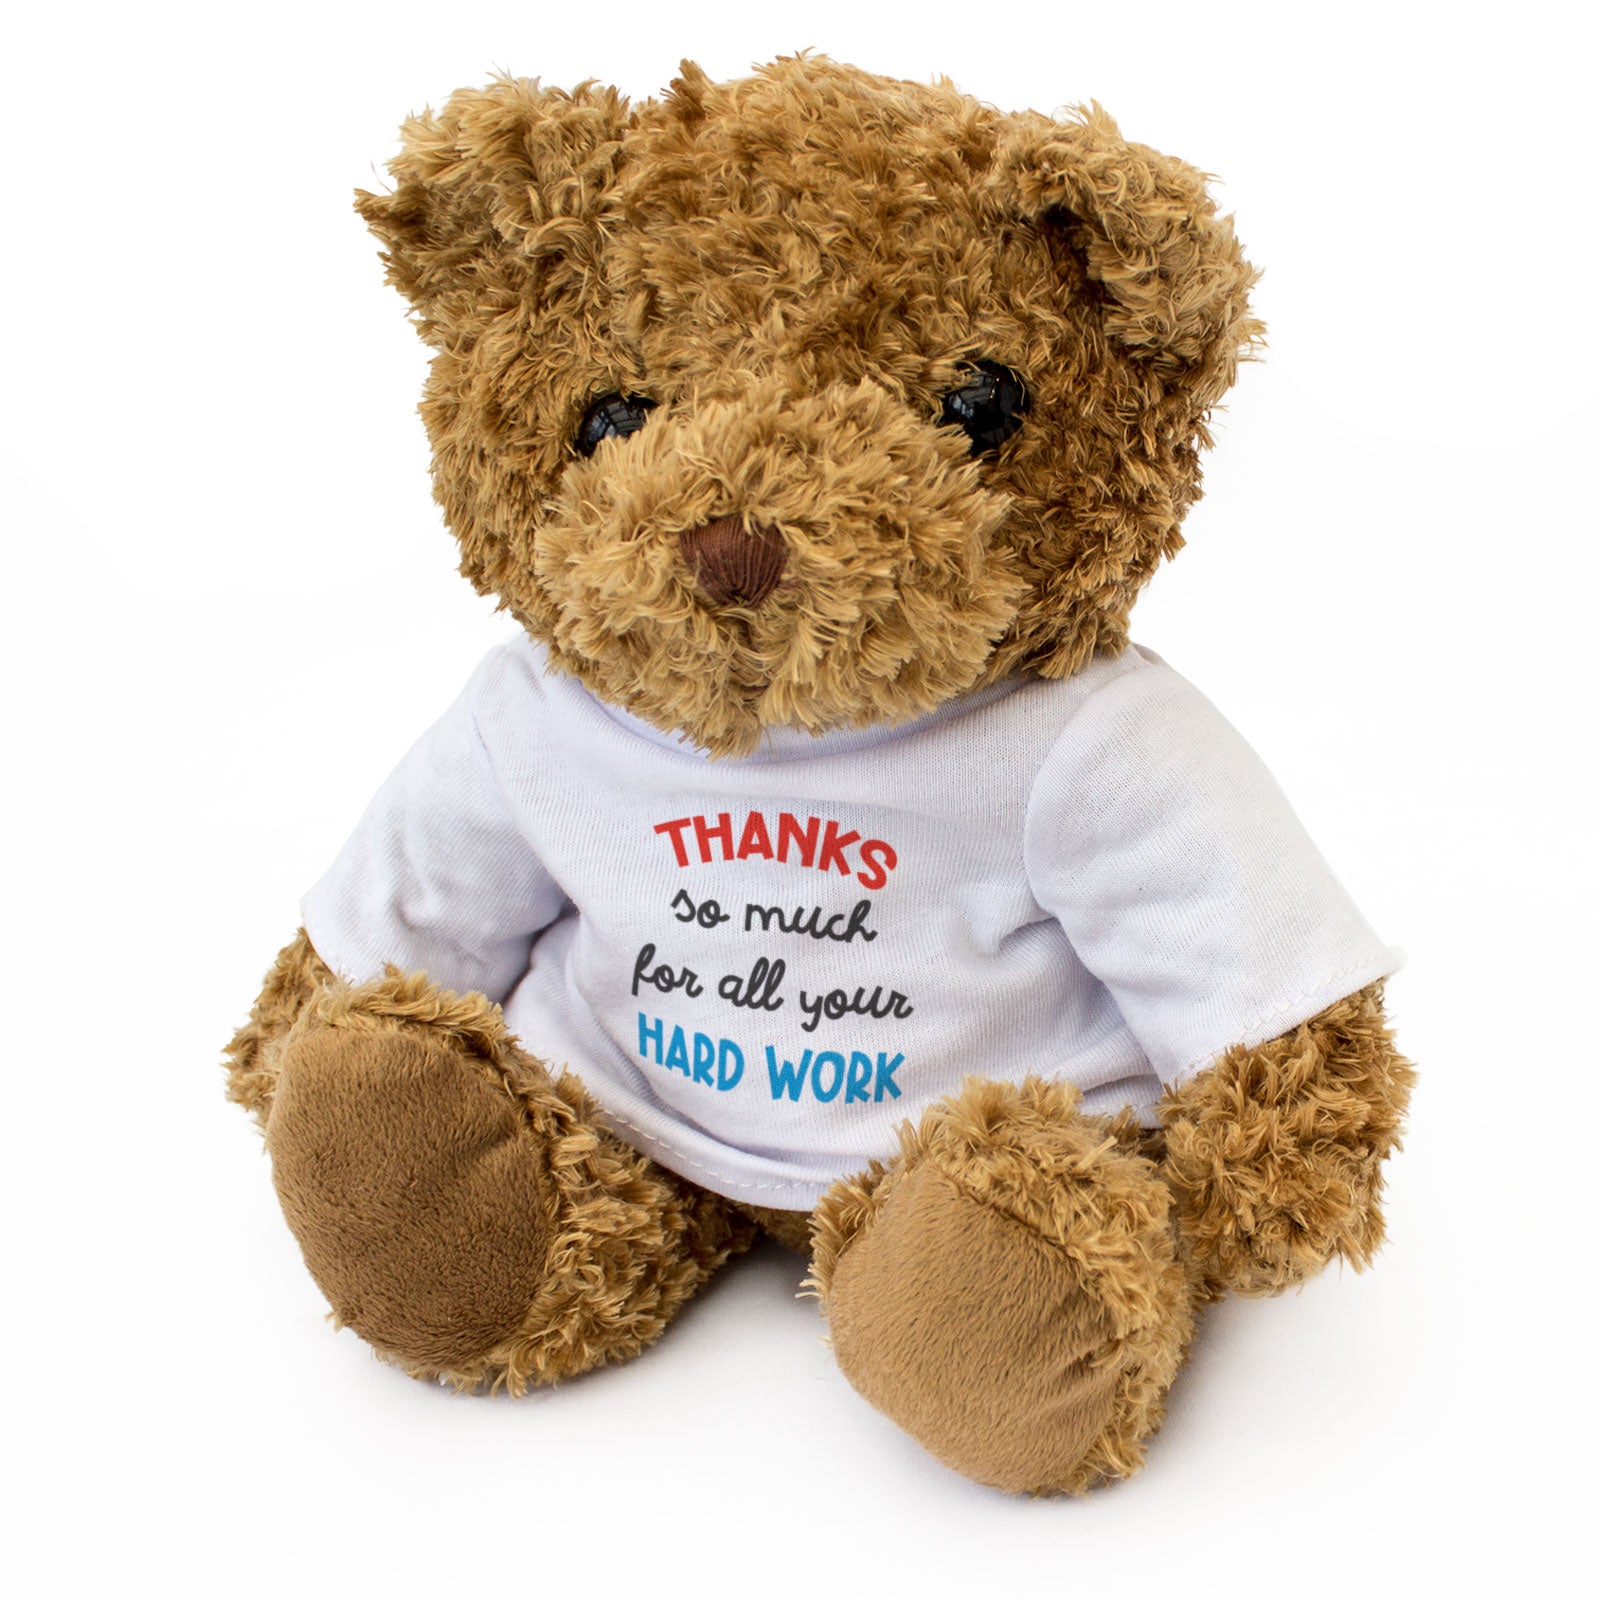 Thanks So Much For All Your Hard Work - Teddy Bear